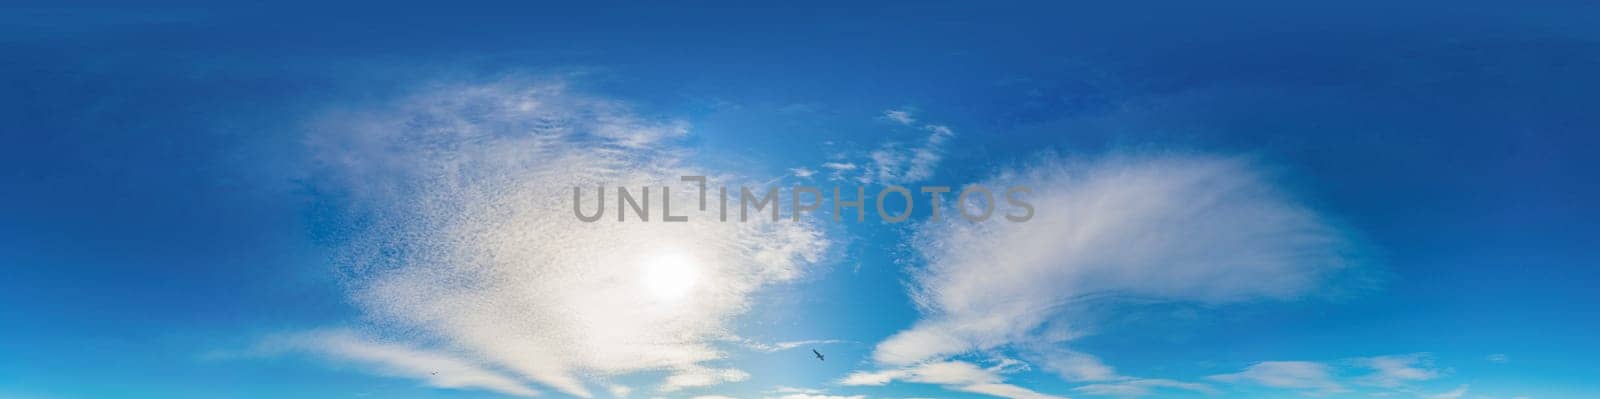 Sunset sky panorama with bright glowing Cirrus clouds. HDR 360 seamless spherical panorama. Full zenith or sky dome for 3D visualization, sky replacement for aerial drone panoramas. by Matiunina